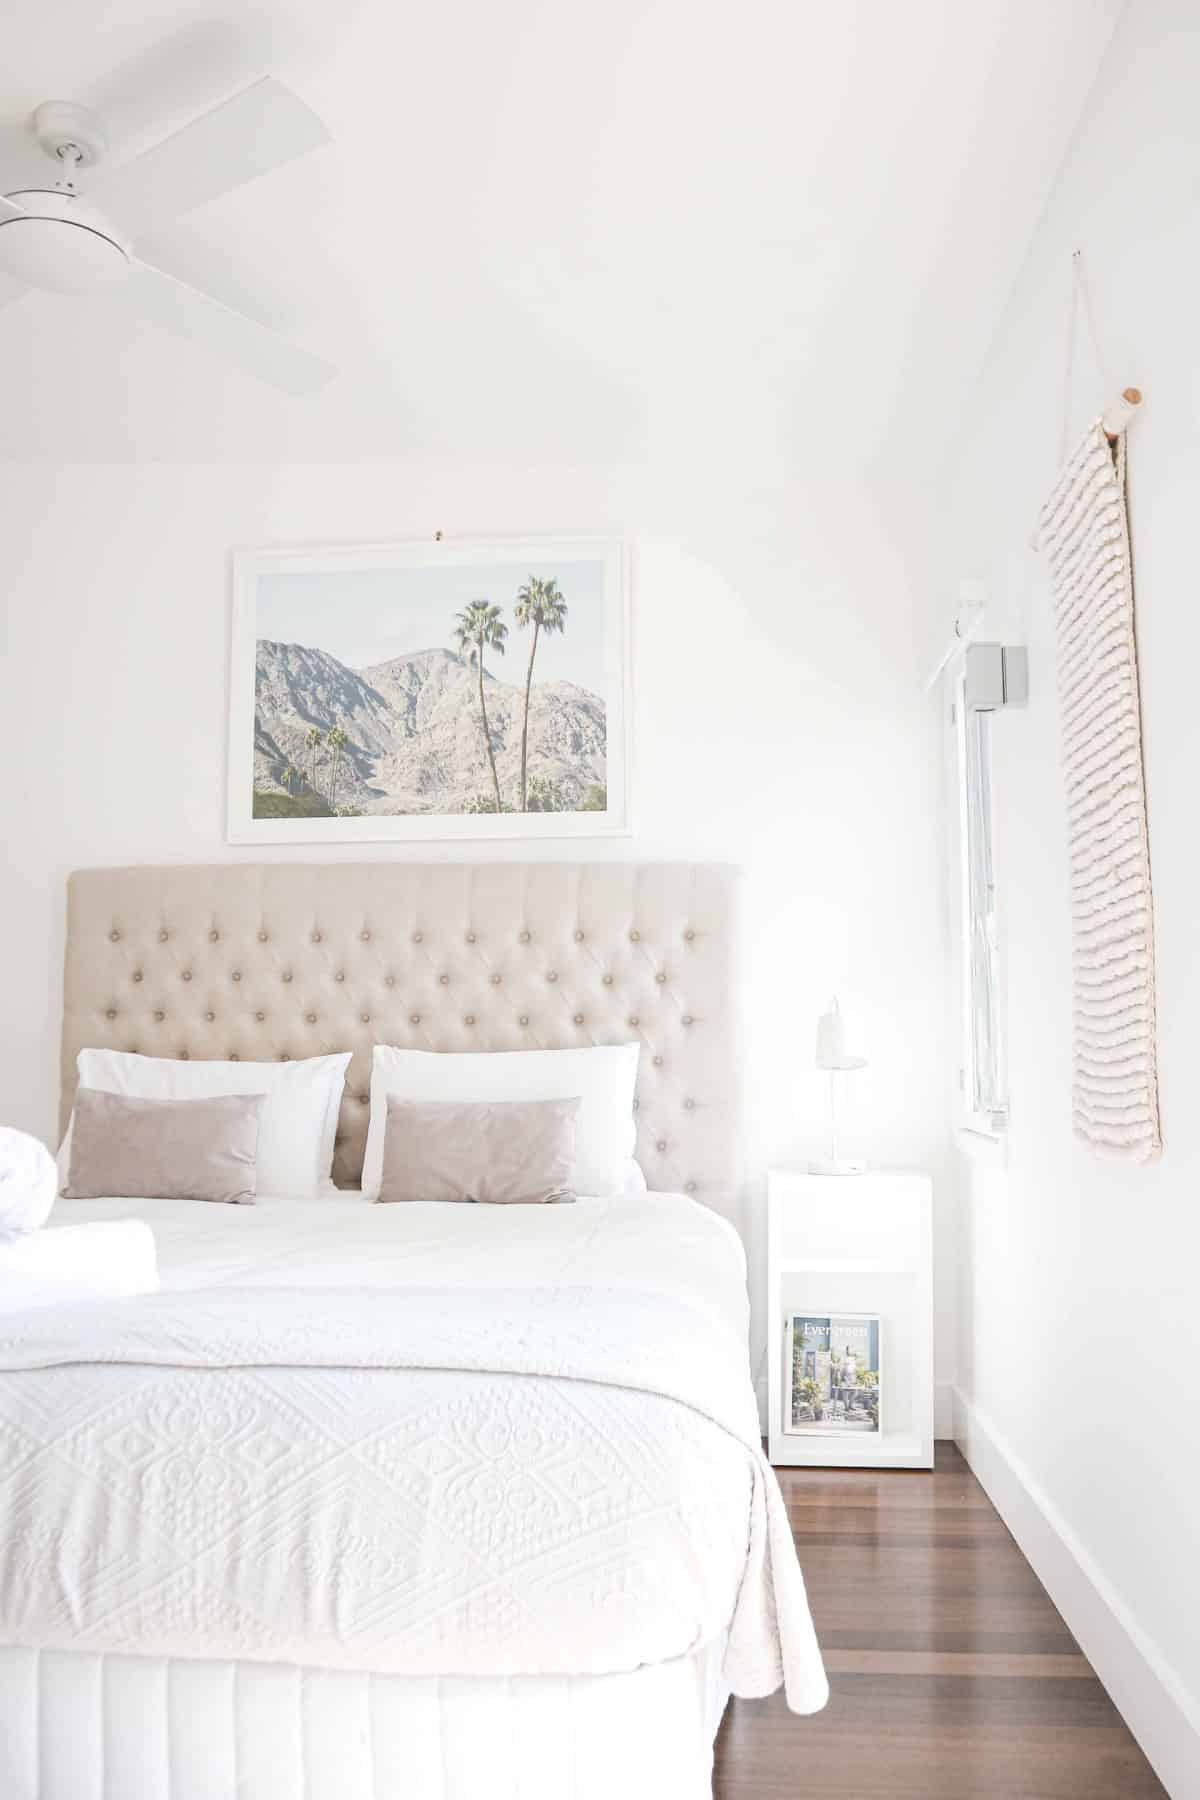 white bedspread with an off-white upholstered headboard in a room with wood floors